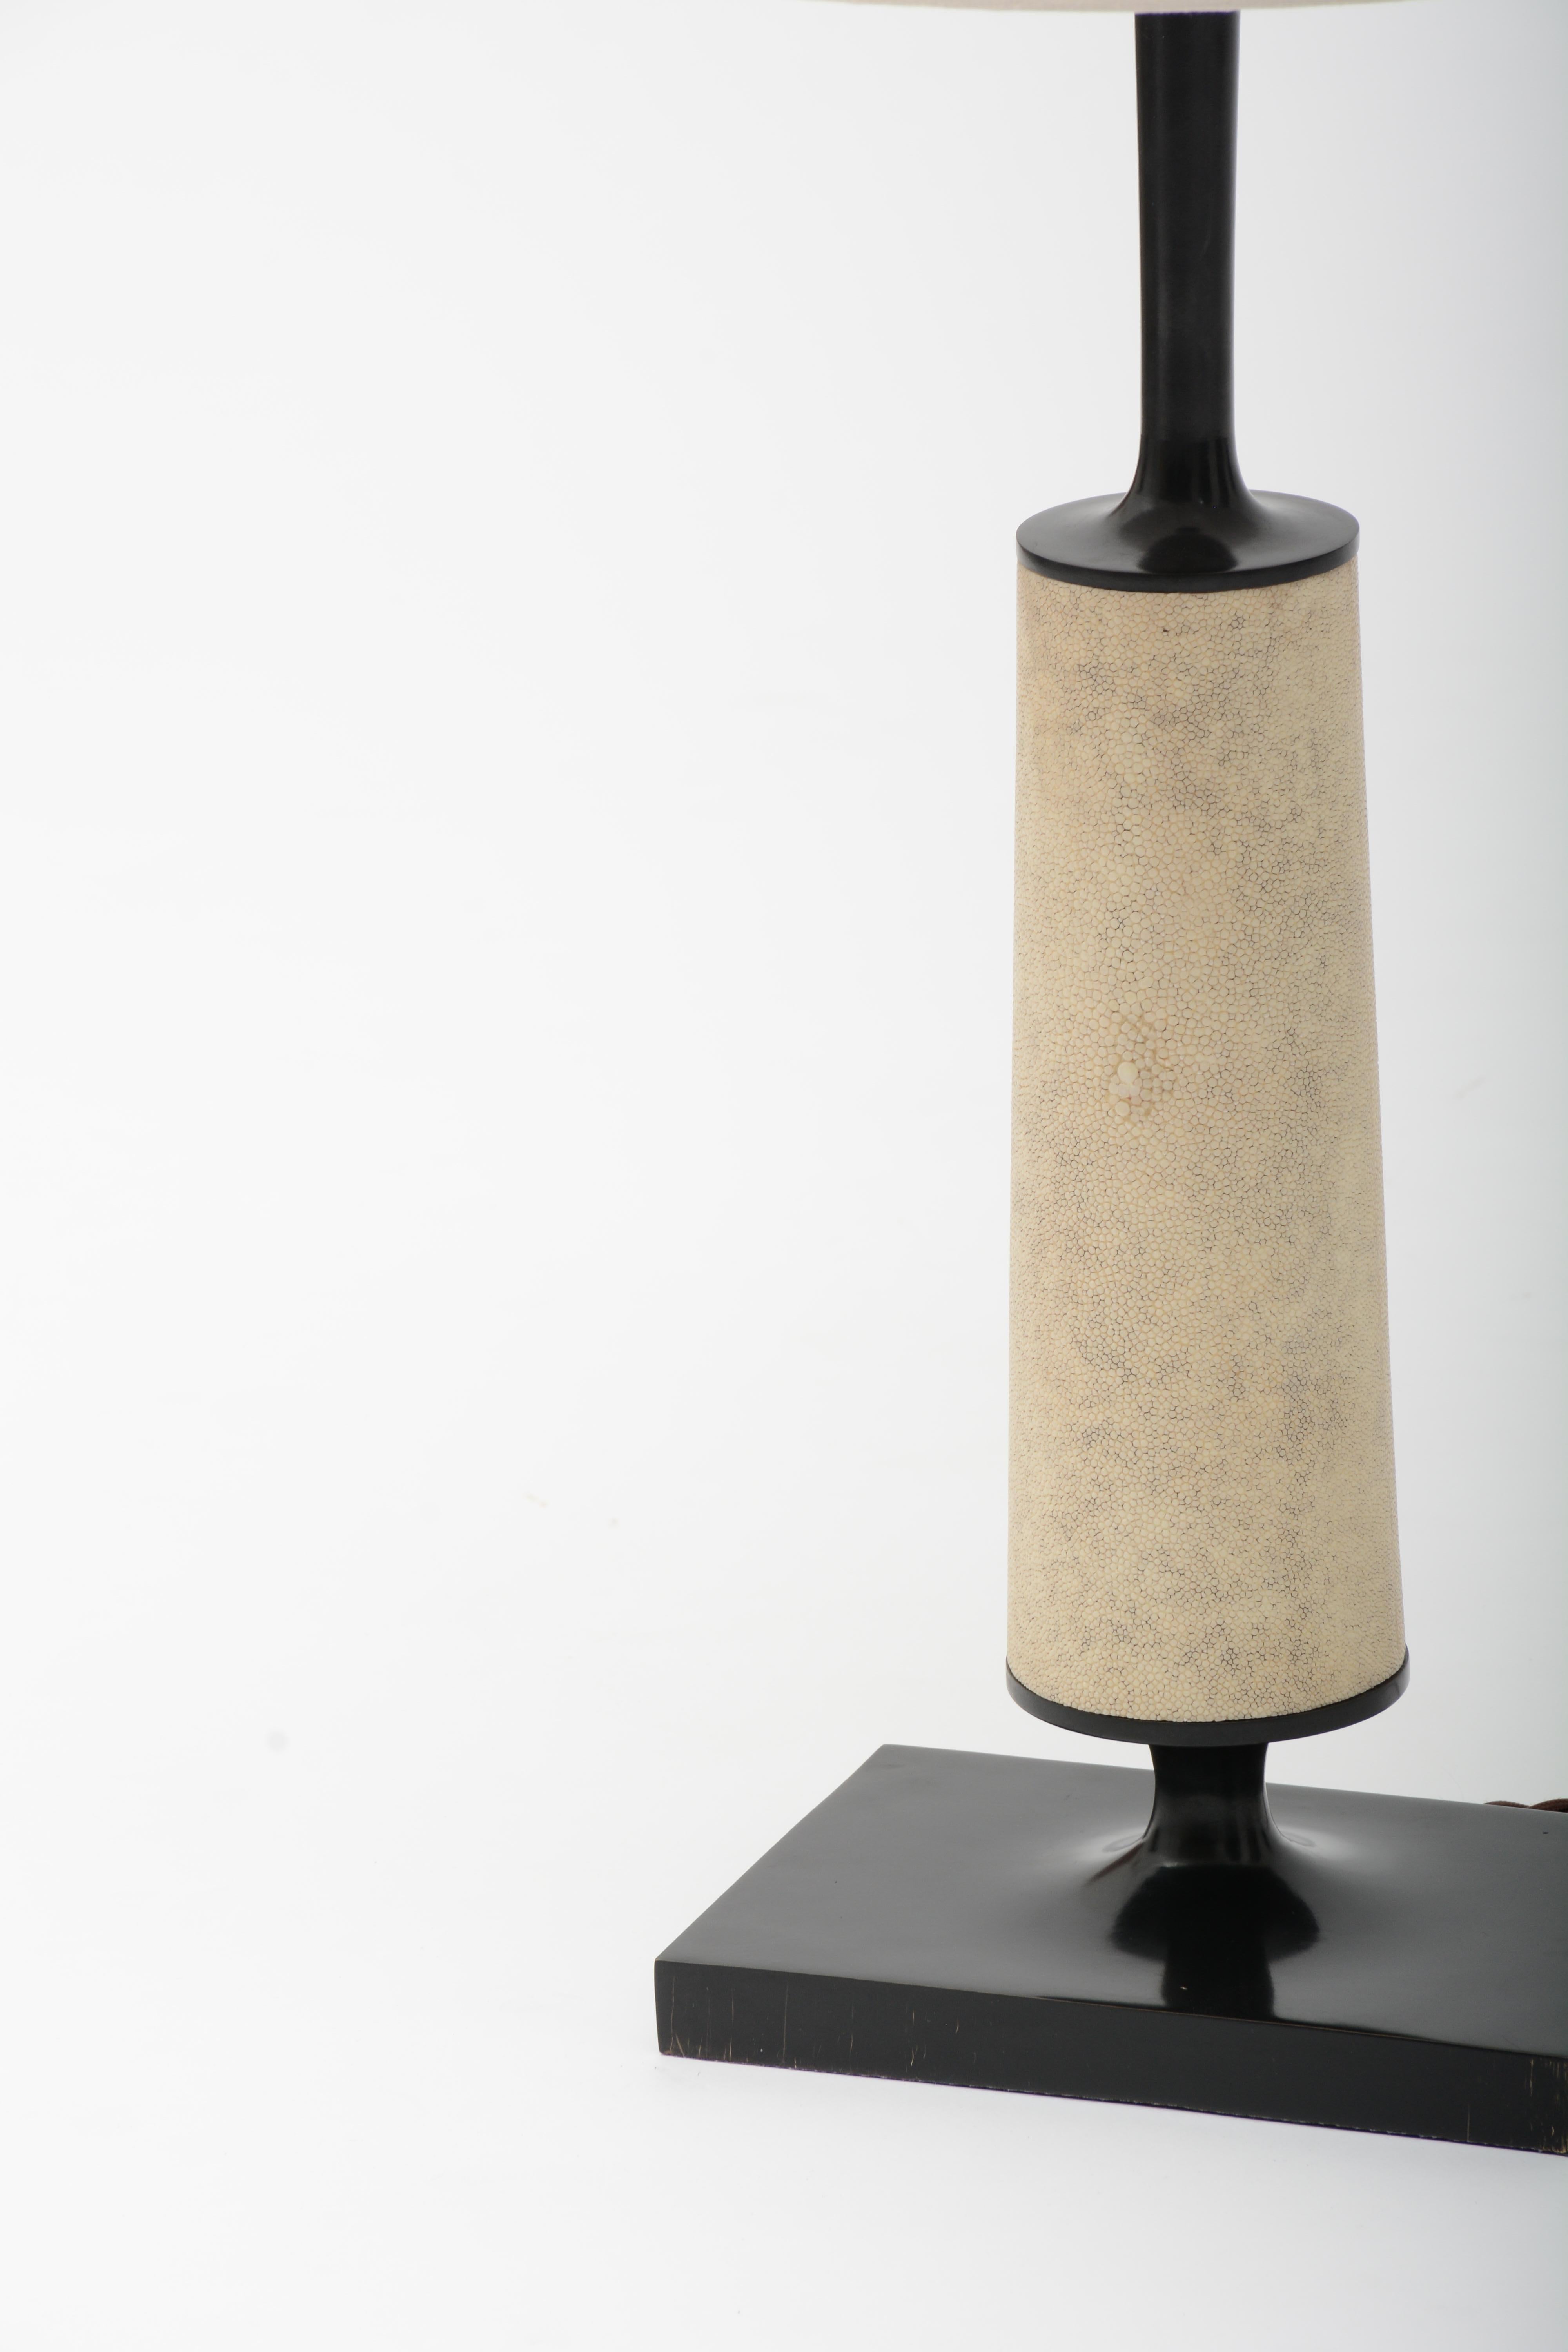 European Jaya Table Lamp, Bronze and Shagreen Table Lamp by Elan Atelier in Stock For Sale